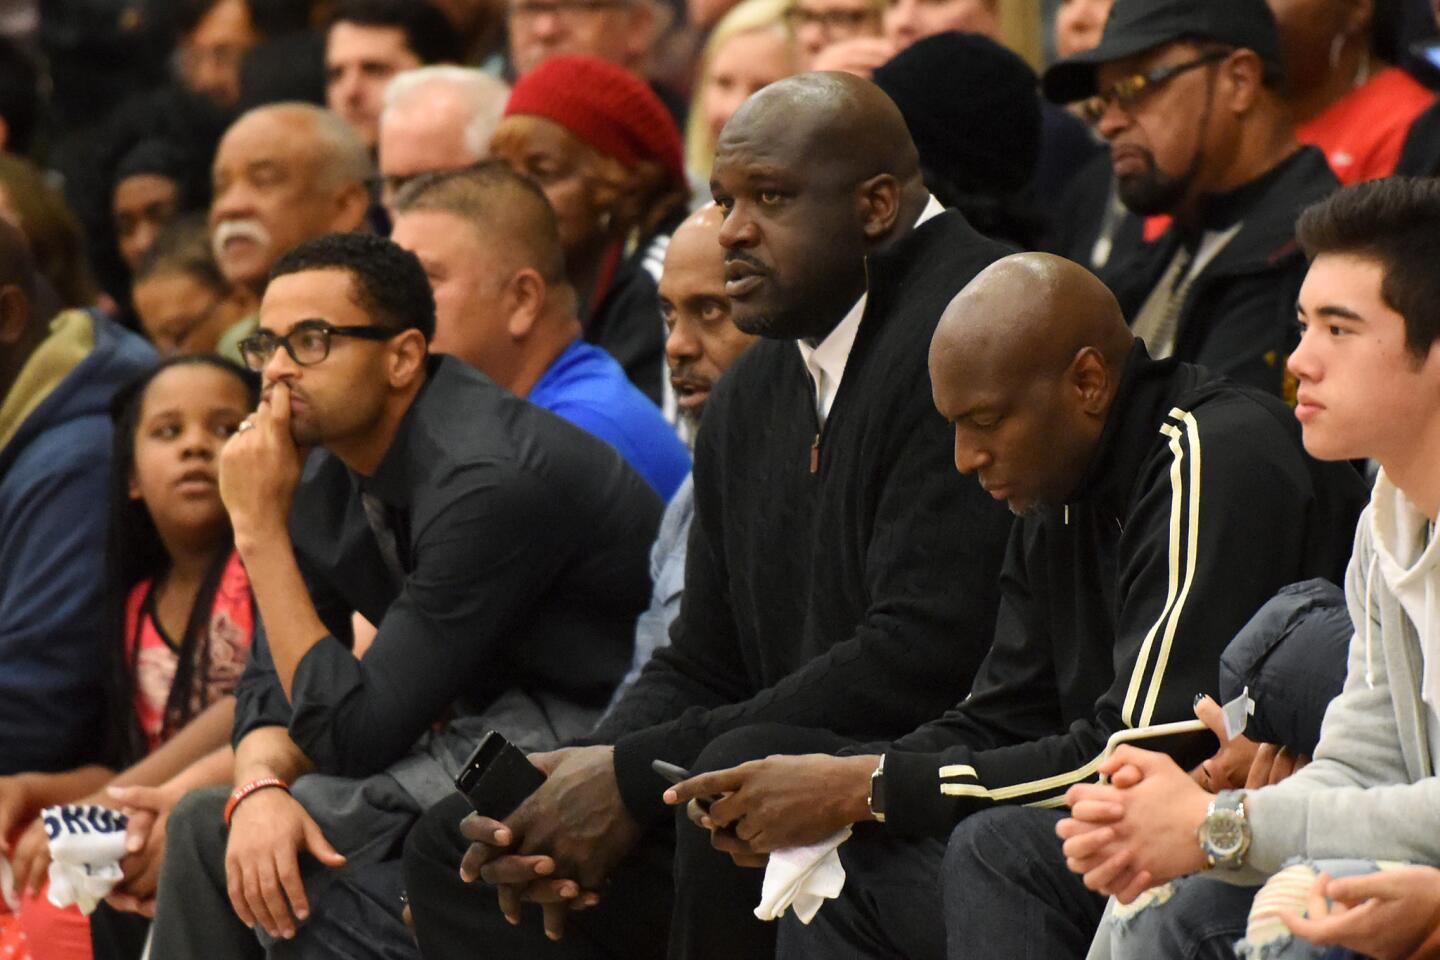 NBA Hall of Fame center Shaquille O'Neal attends the Crossroads-Brentwood game on Jan. 6.